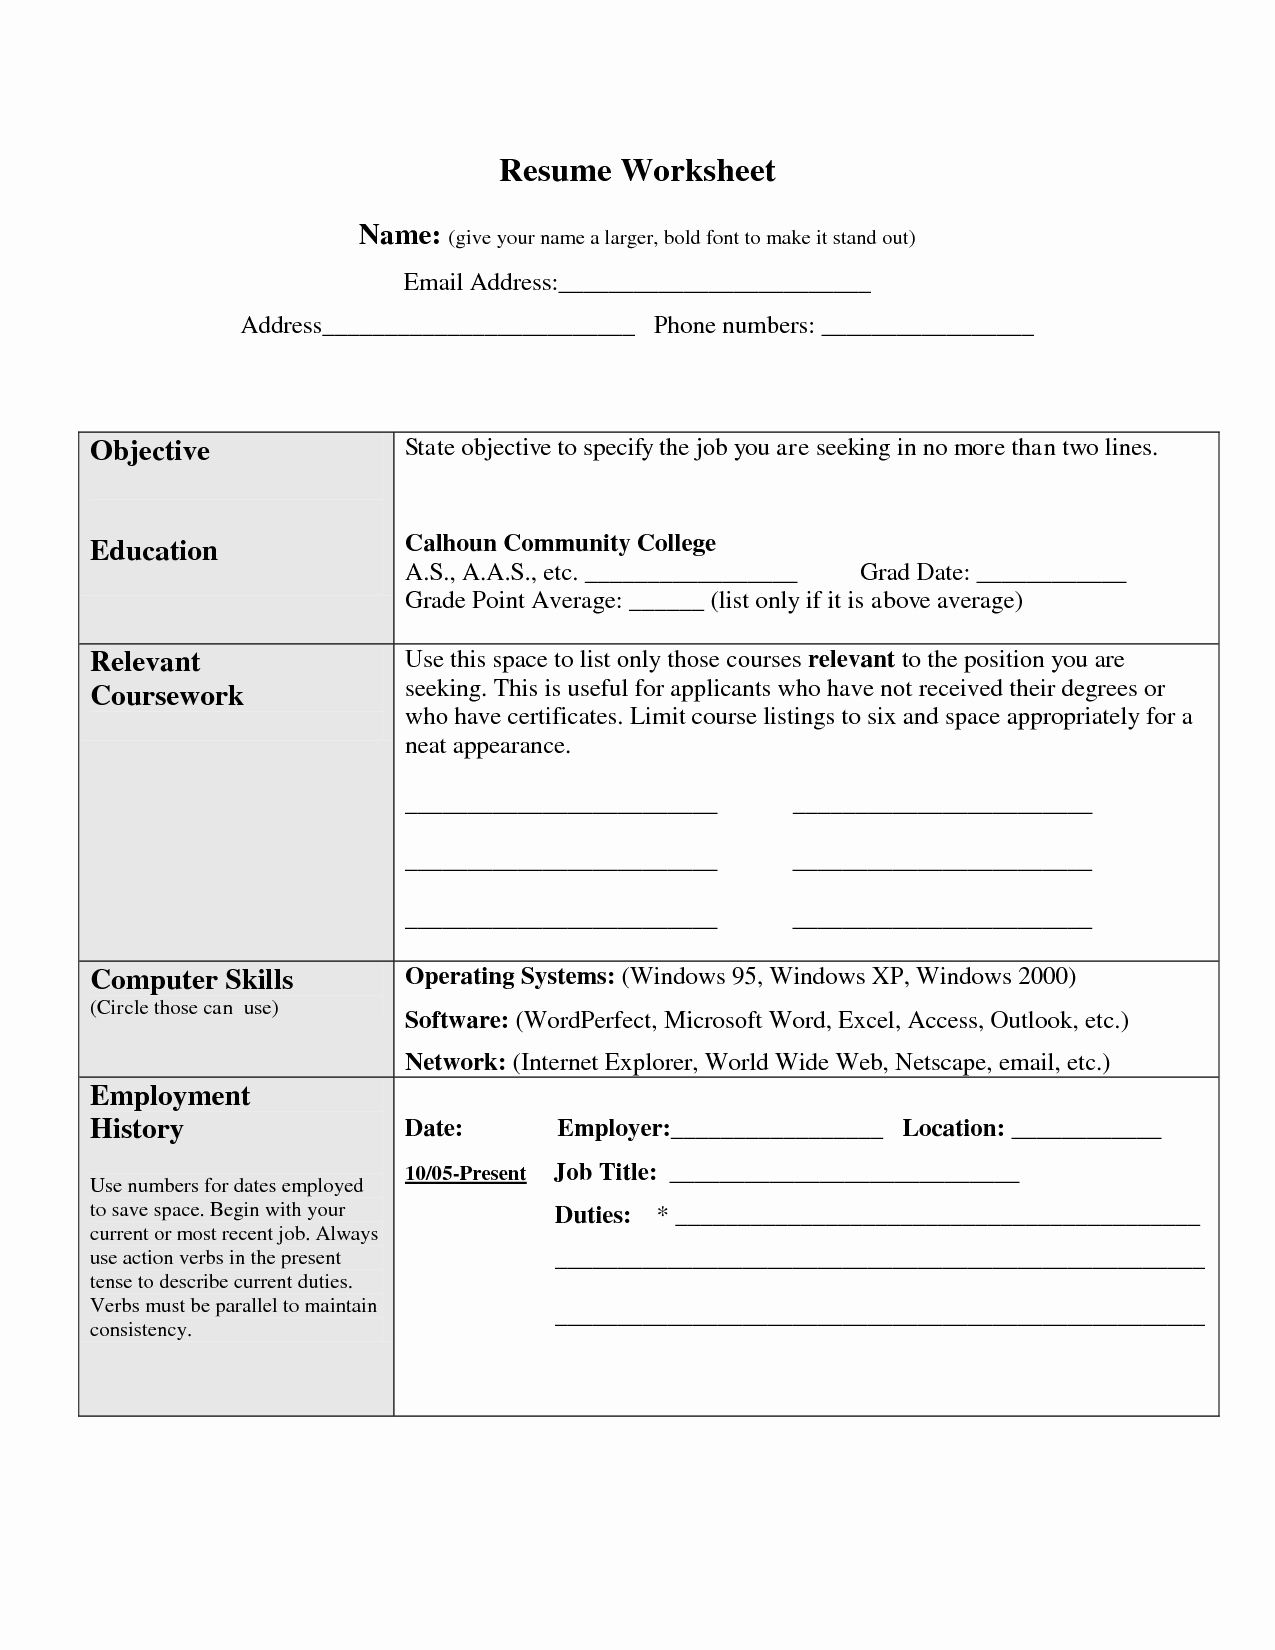 Resume Worksheet for Adults Best Of 17 Best Of Creating A Resume Worksheet Fill In